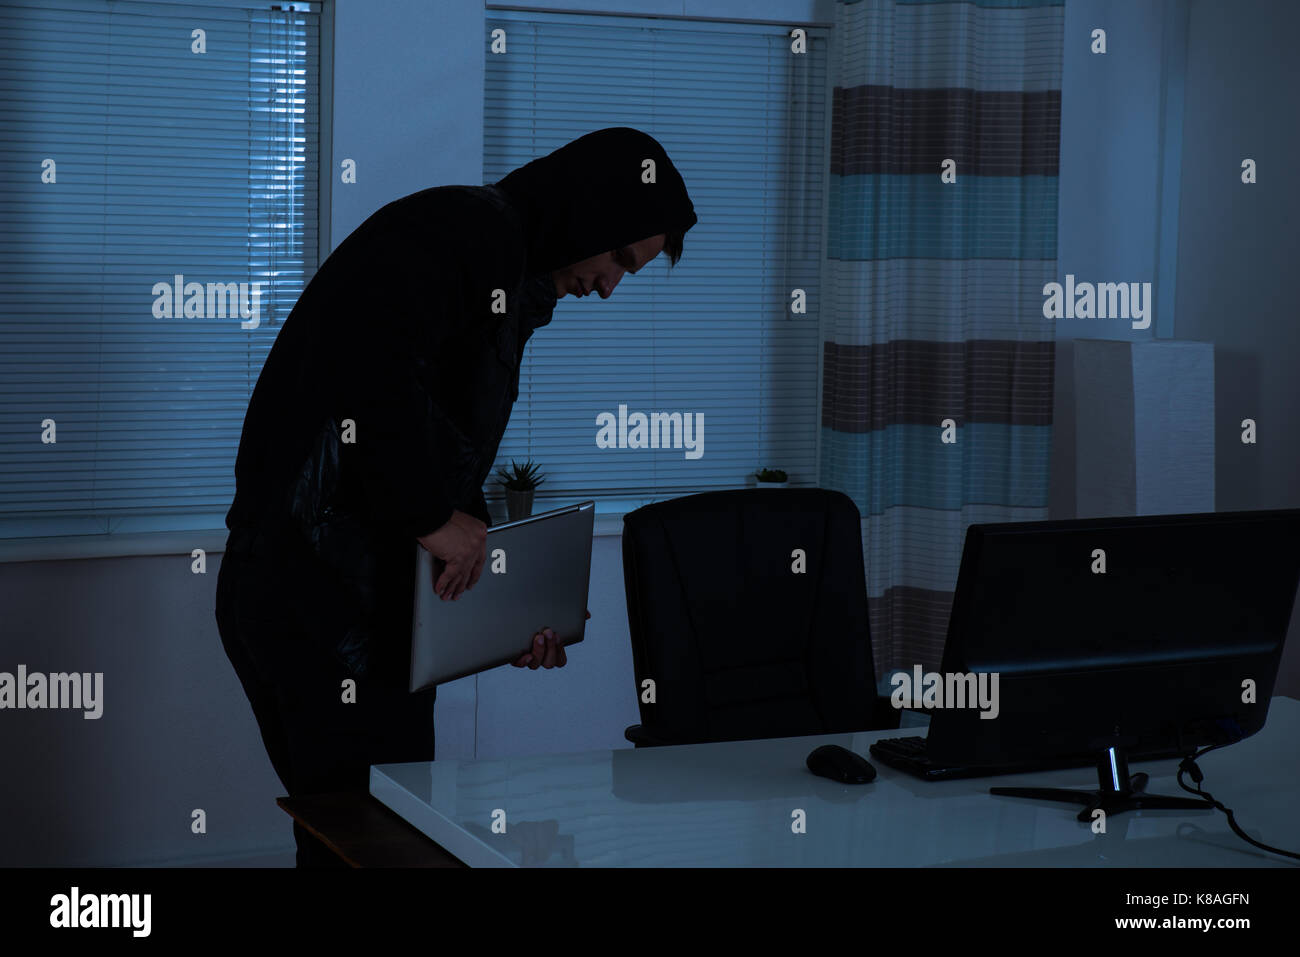 Male Thief Stealing Laptop From Office At Night Stock Photo